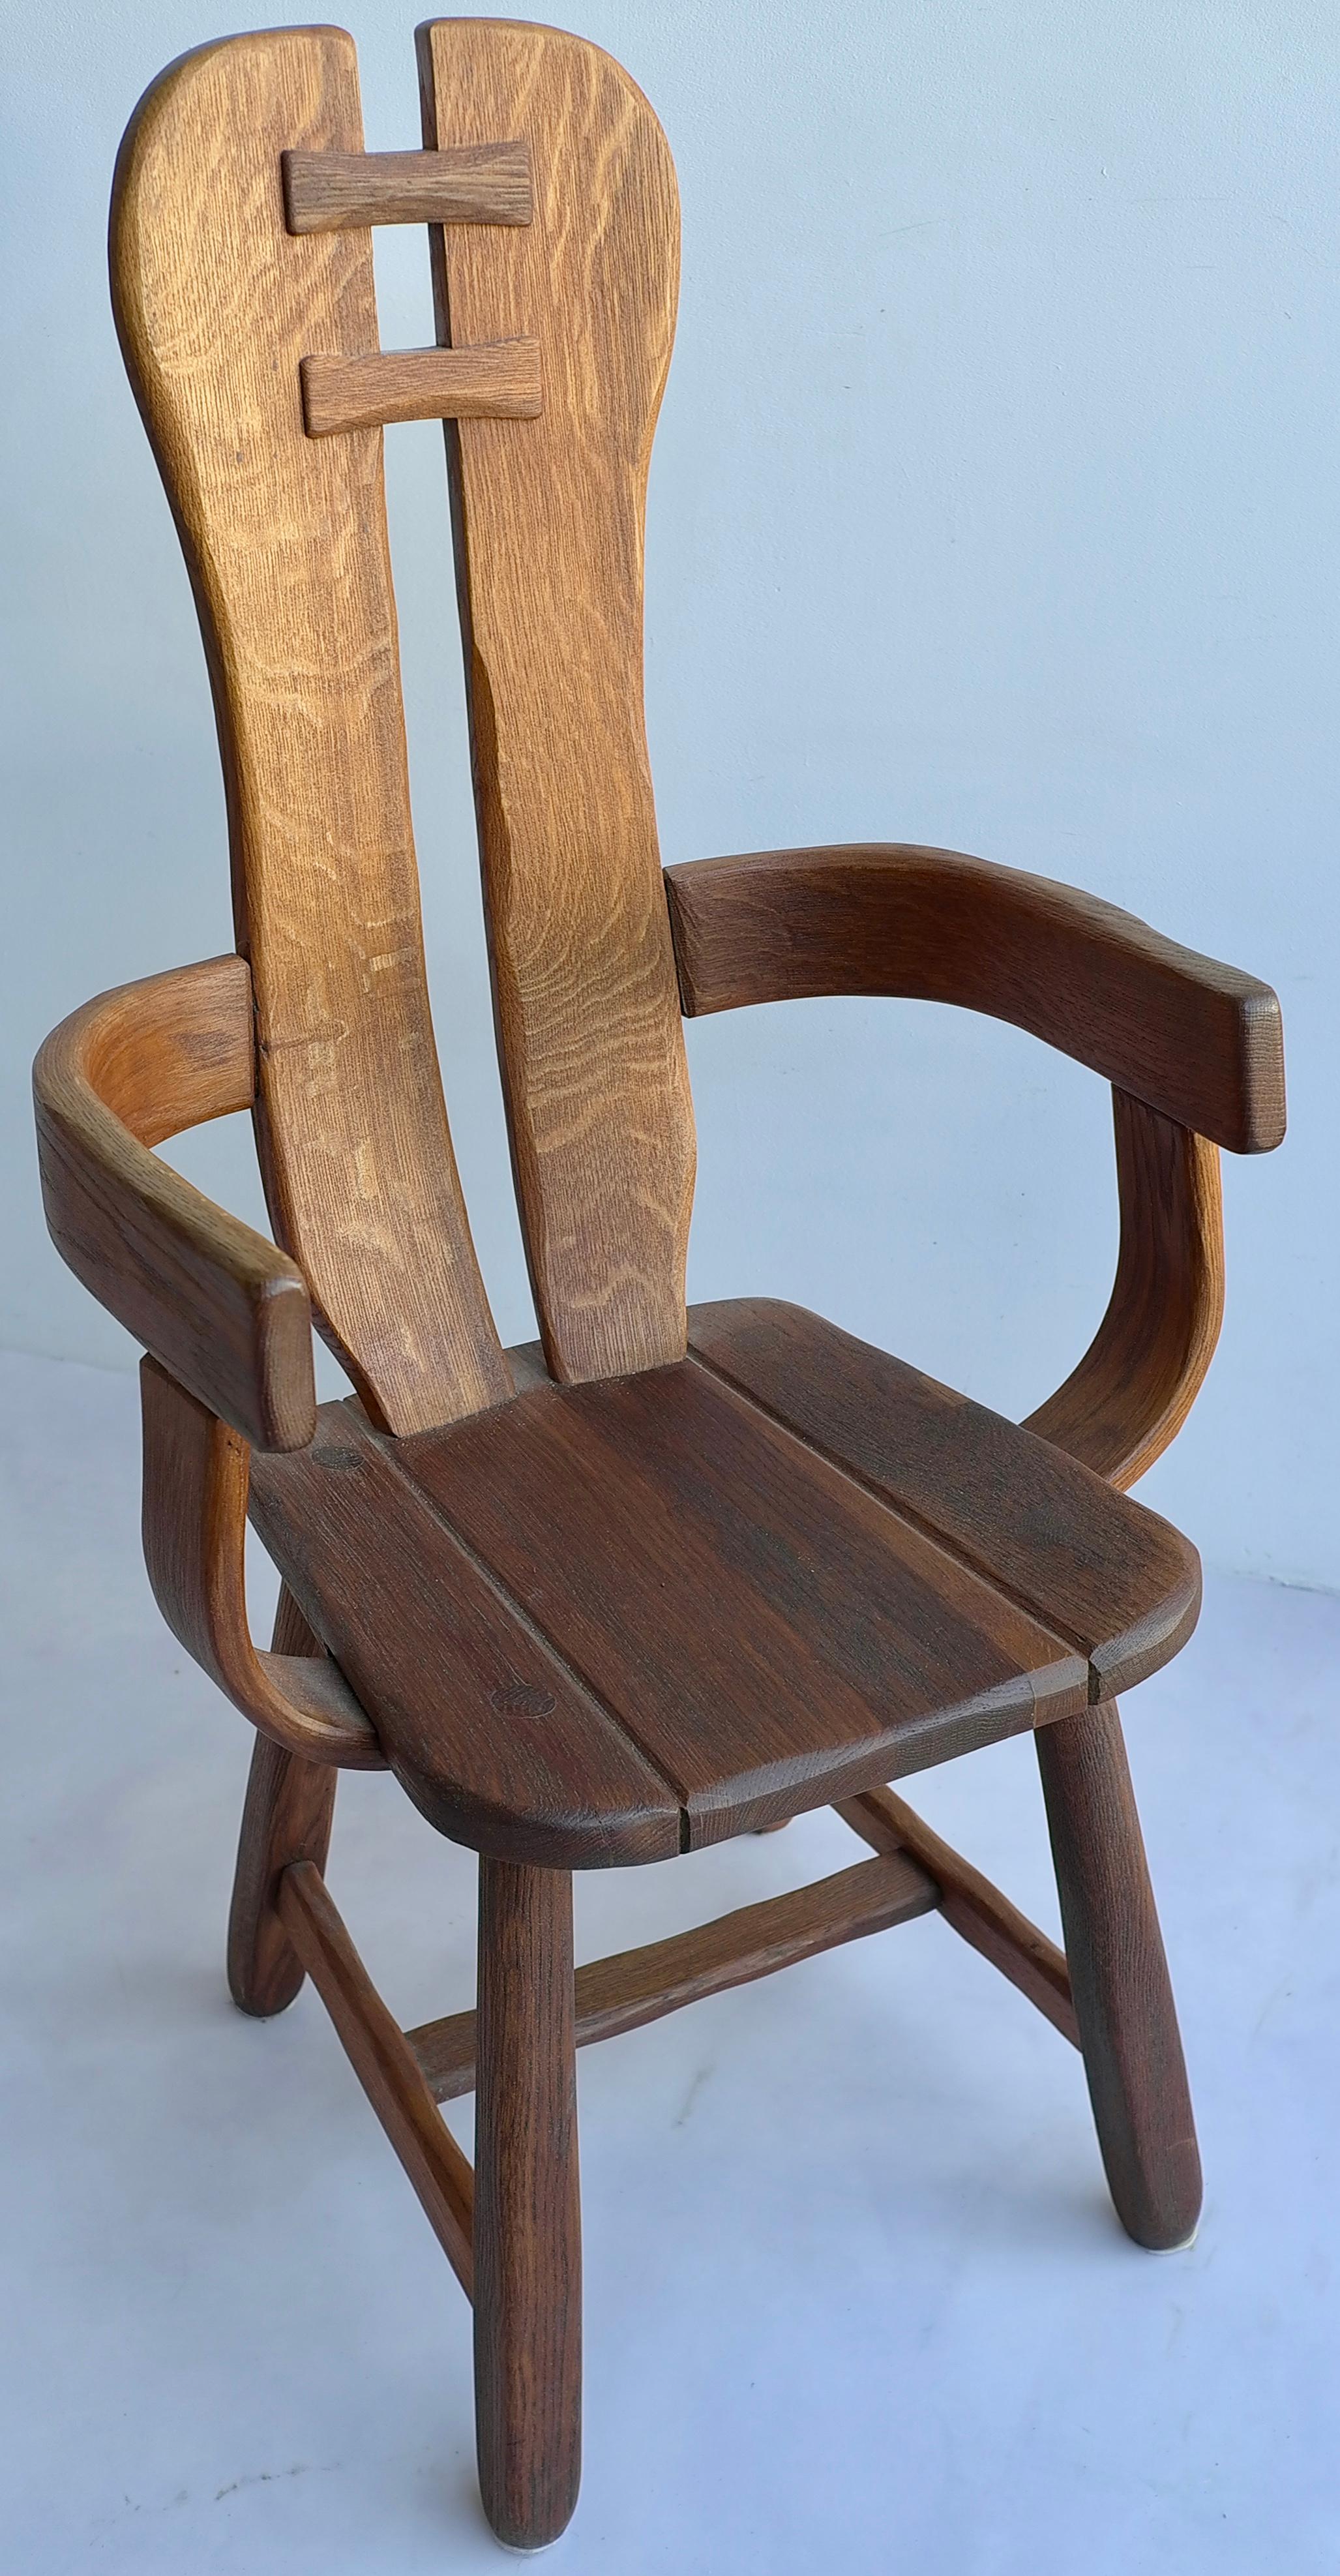 Organic midcentury high back side chair in solid oak.